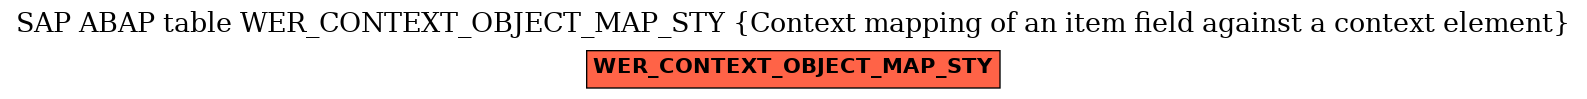 E-R Diagram for table WER_CONTEXT_OBJECT_MAP_STY (Context mapping of an item field against a context element)